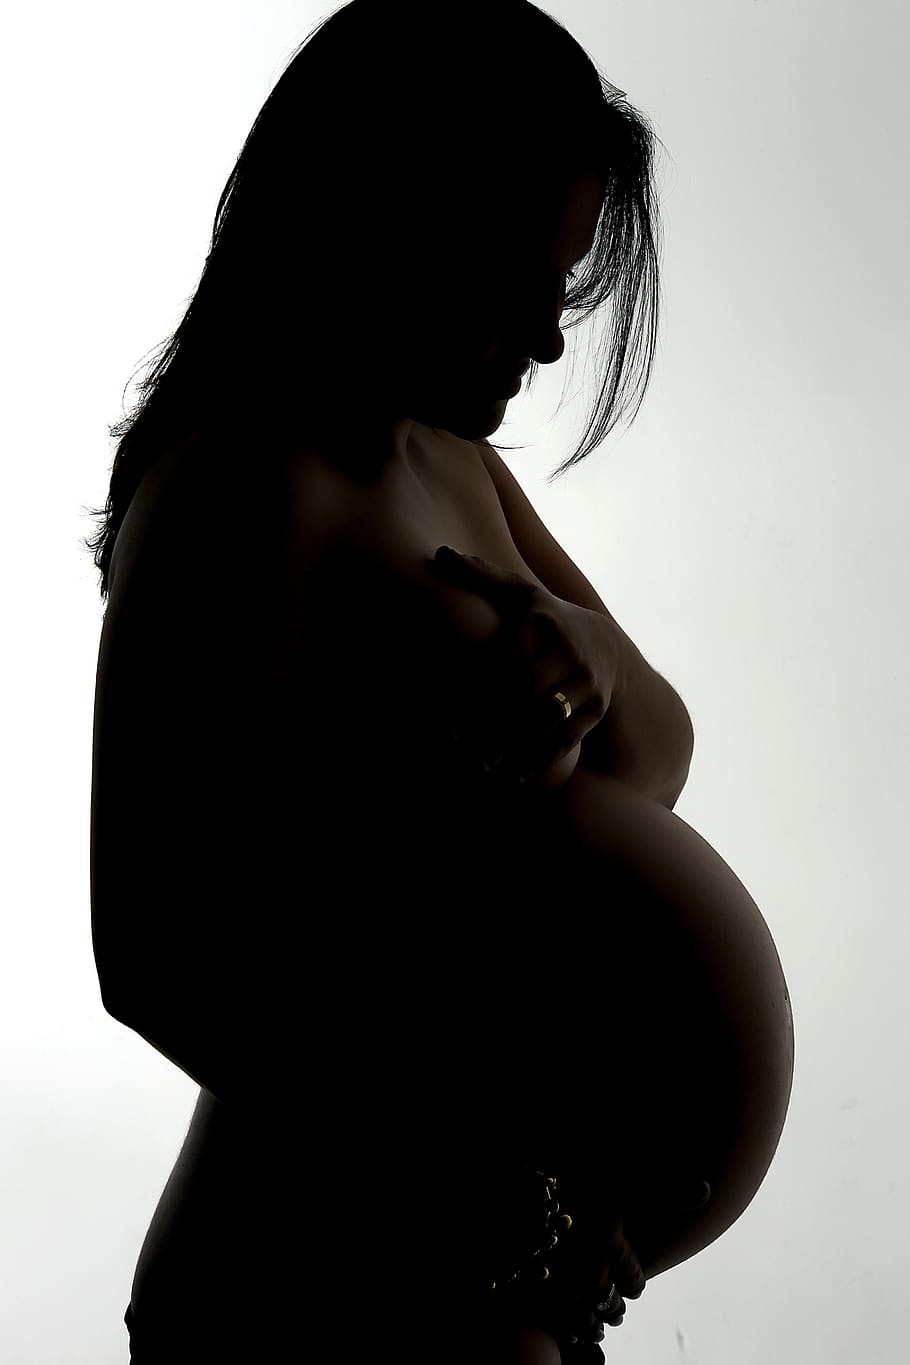 pregnant woman, pregnant, gestation, belly, mother, big belly, mom, maternity, one person, indoors